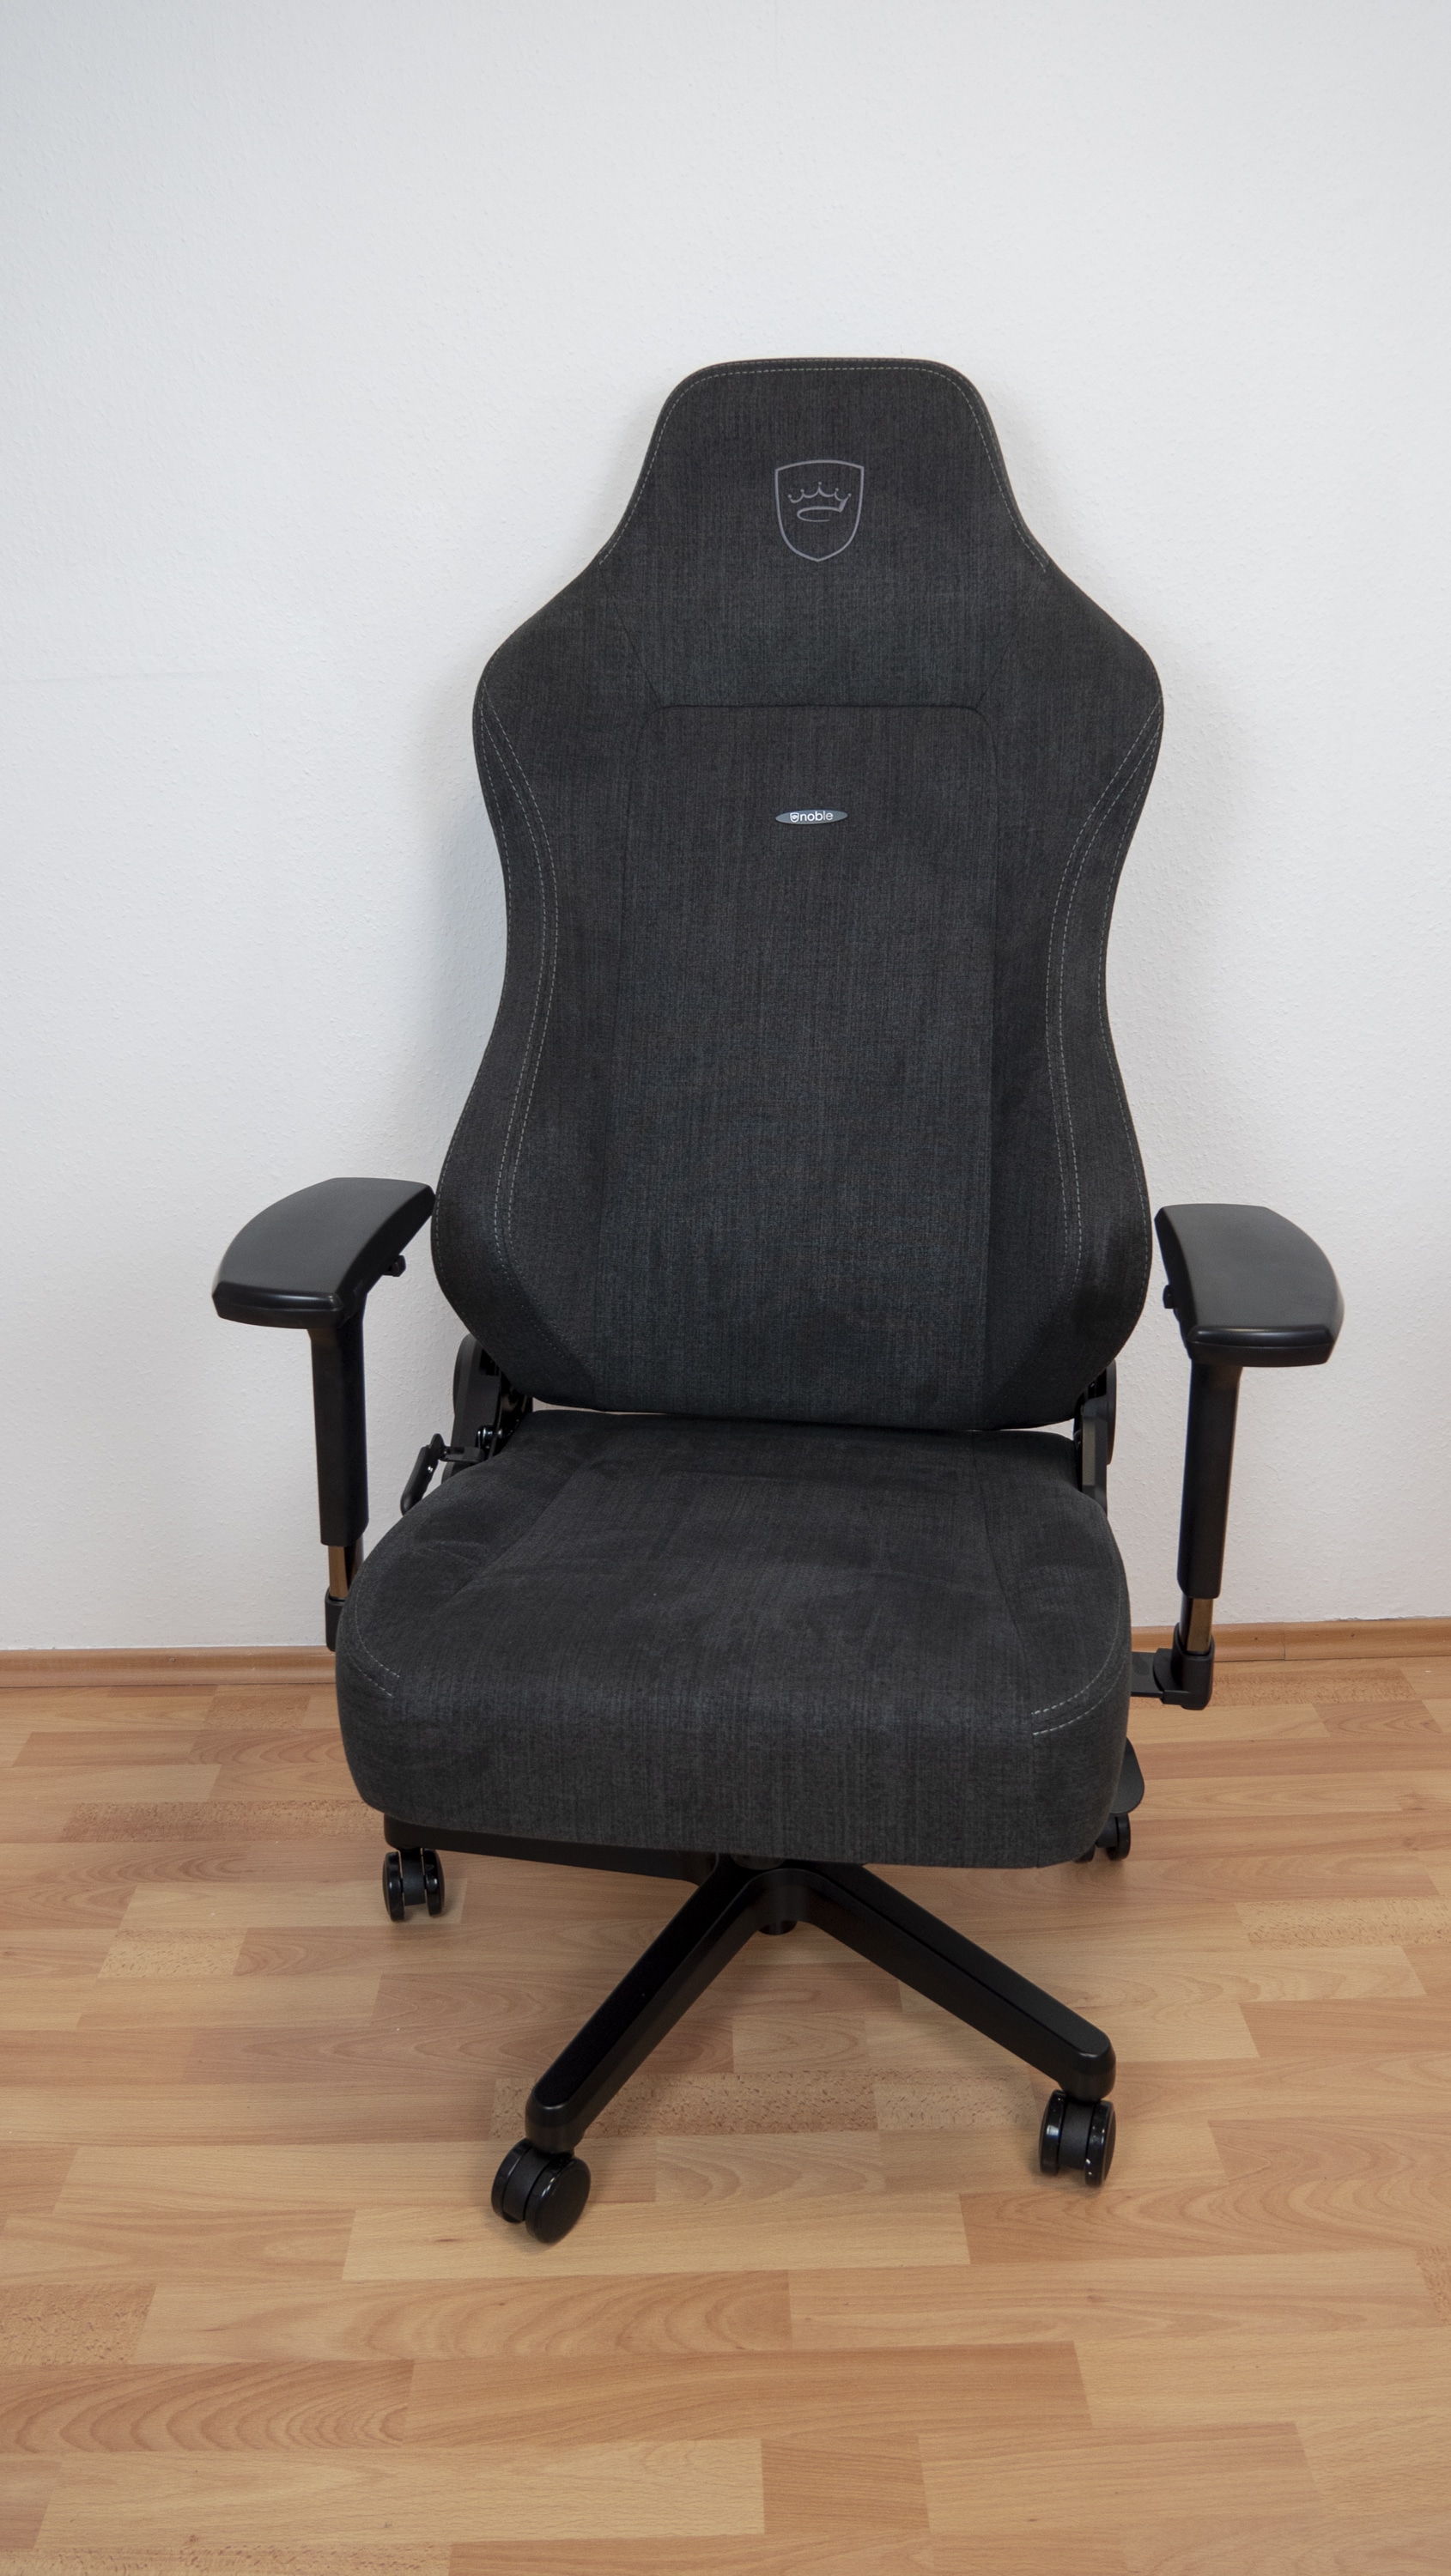 Noblechairs Hero Review: An Exquisite Chair For PC Gamers